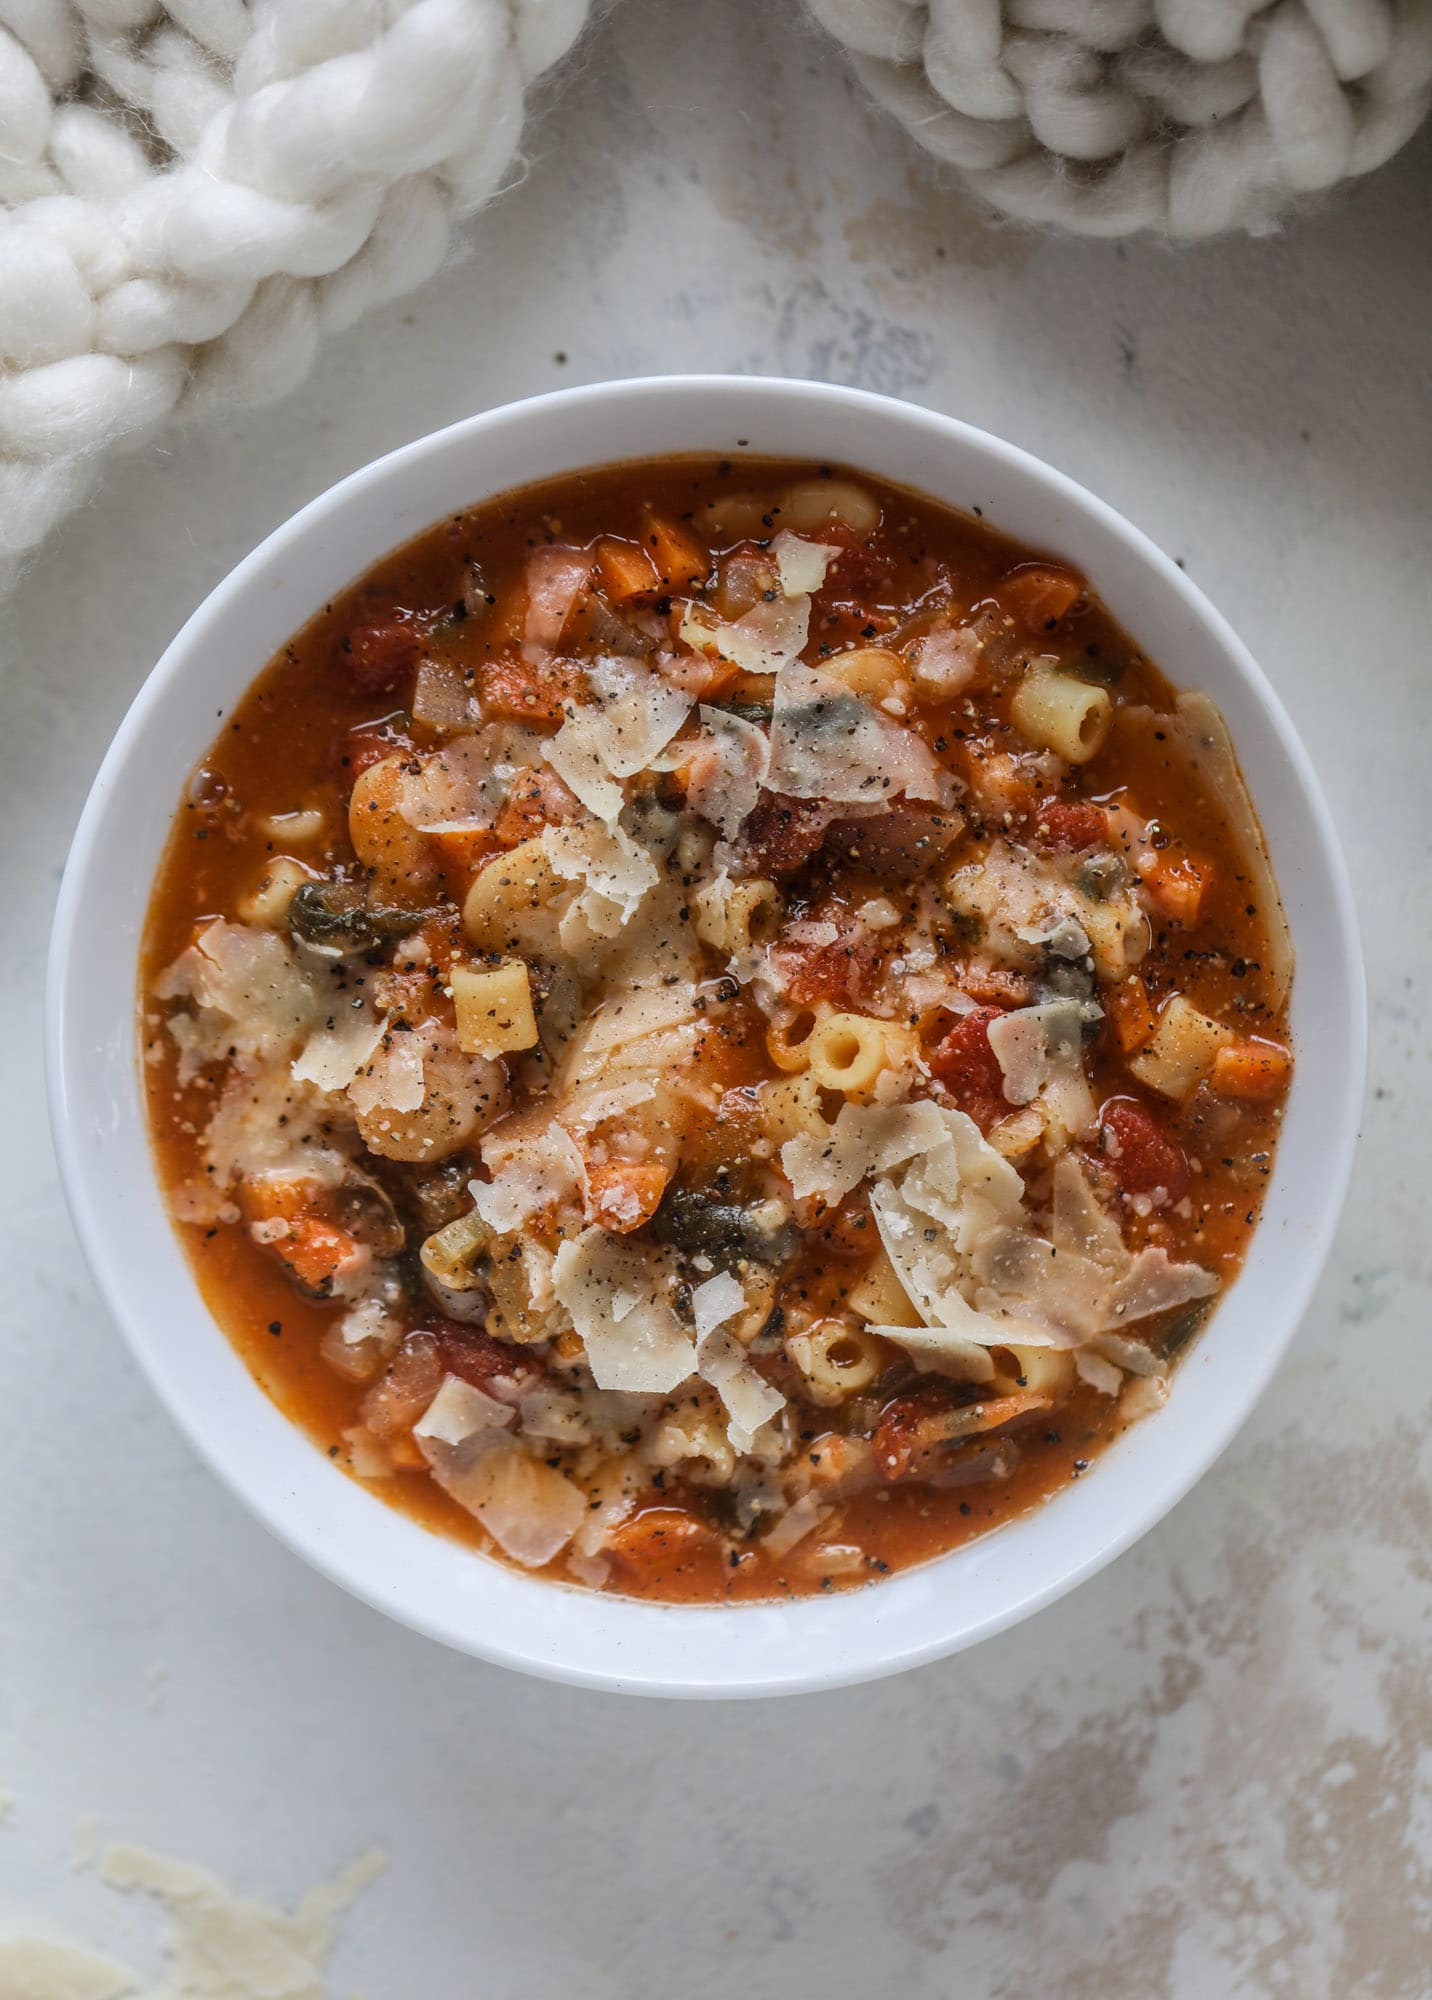 This fire roasted minestrone soup is like a huge in a bowl. Chock full of vegetables, fire roasted tomatoes and butter beans, the bowl is topped off with a delicious kale pesto that adds even more flavor. Satisfying, healthy and perfect for dinner! I howsweeteats.com #minestrone #soup